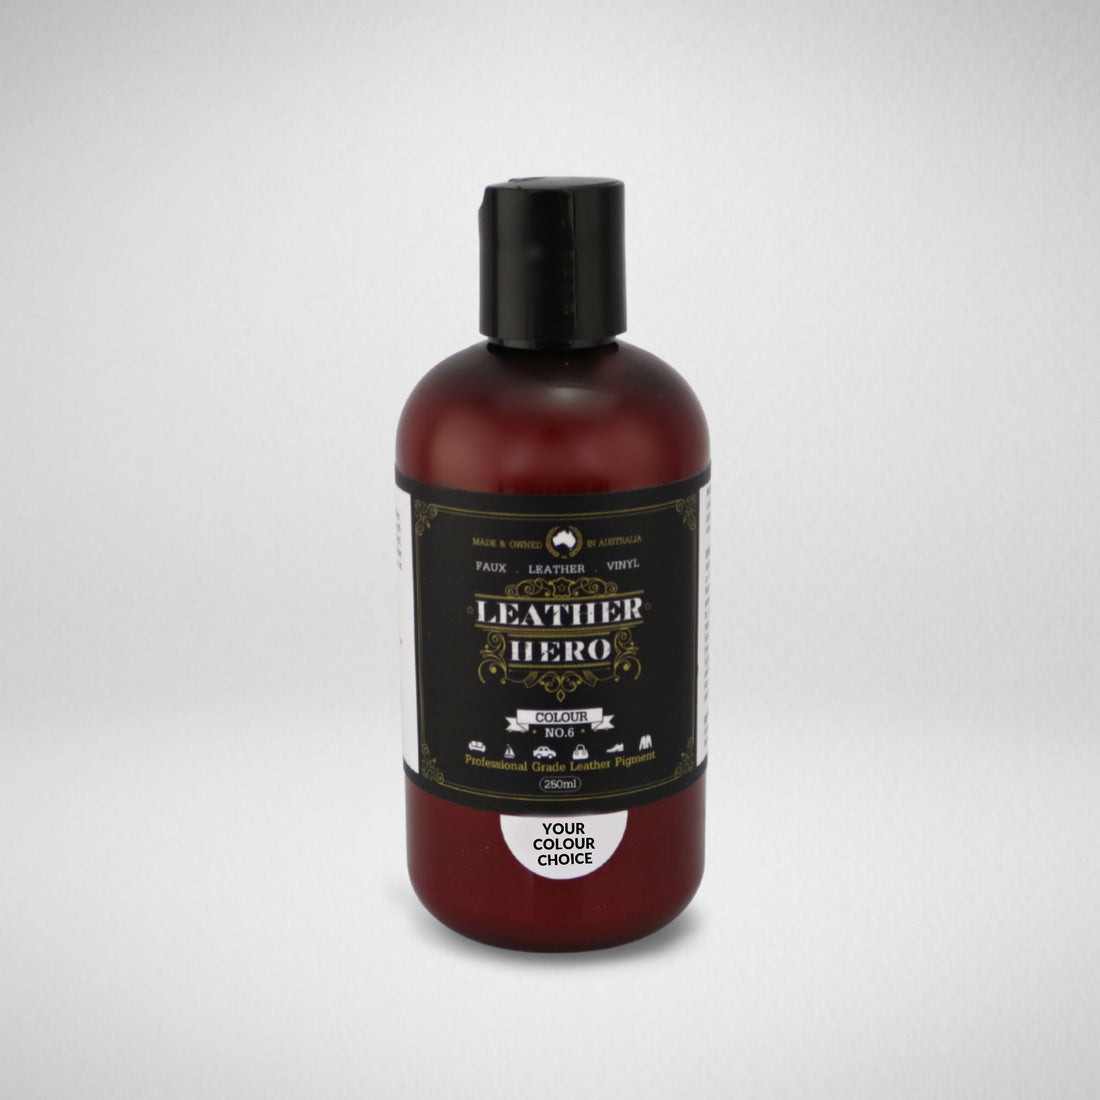 Leather Paint - White Leather Repair & Recolouring Leather Hero Australia